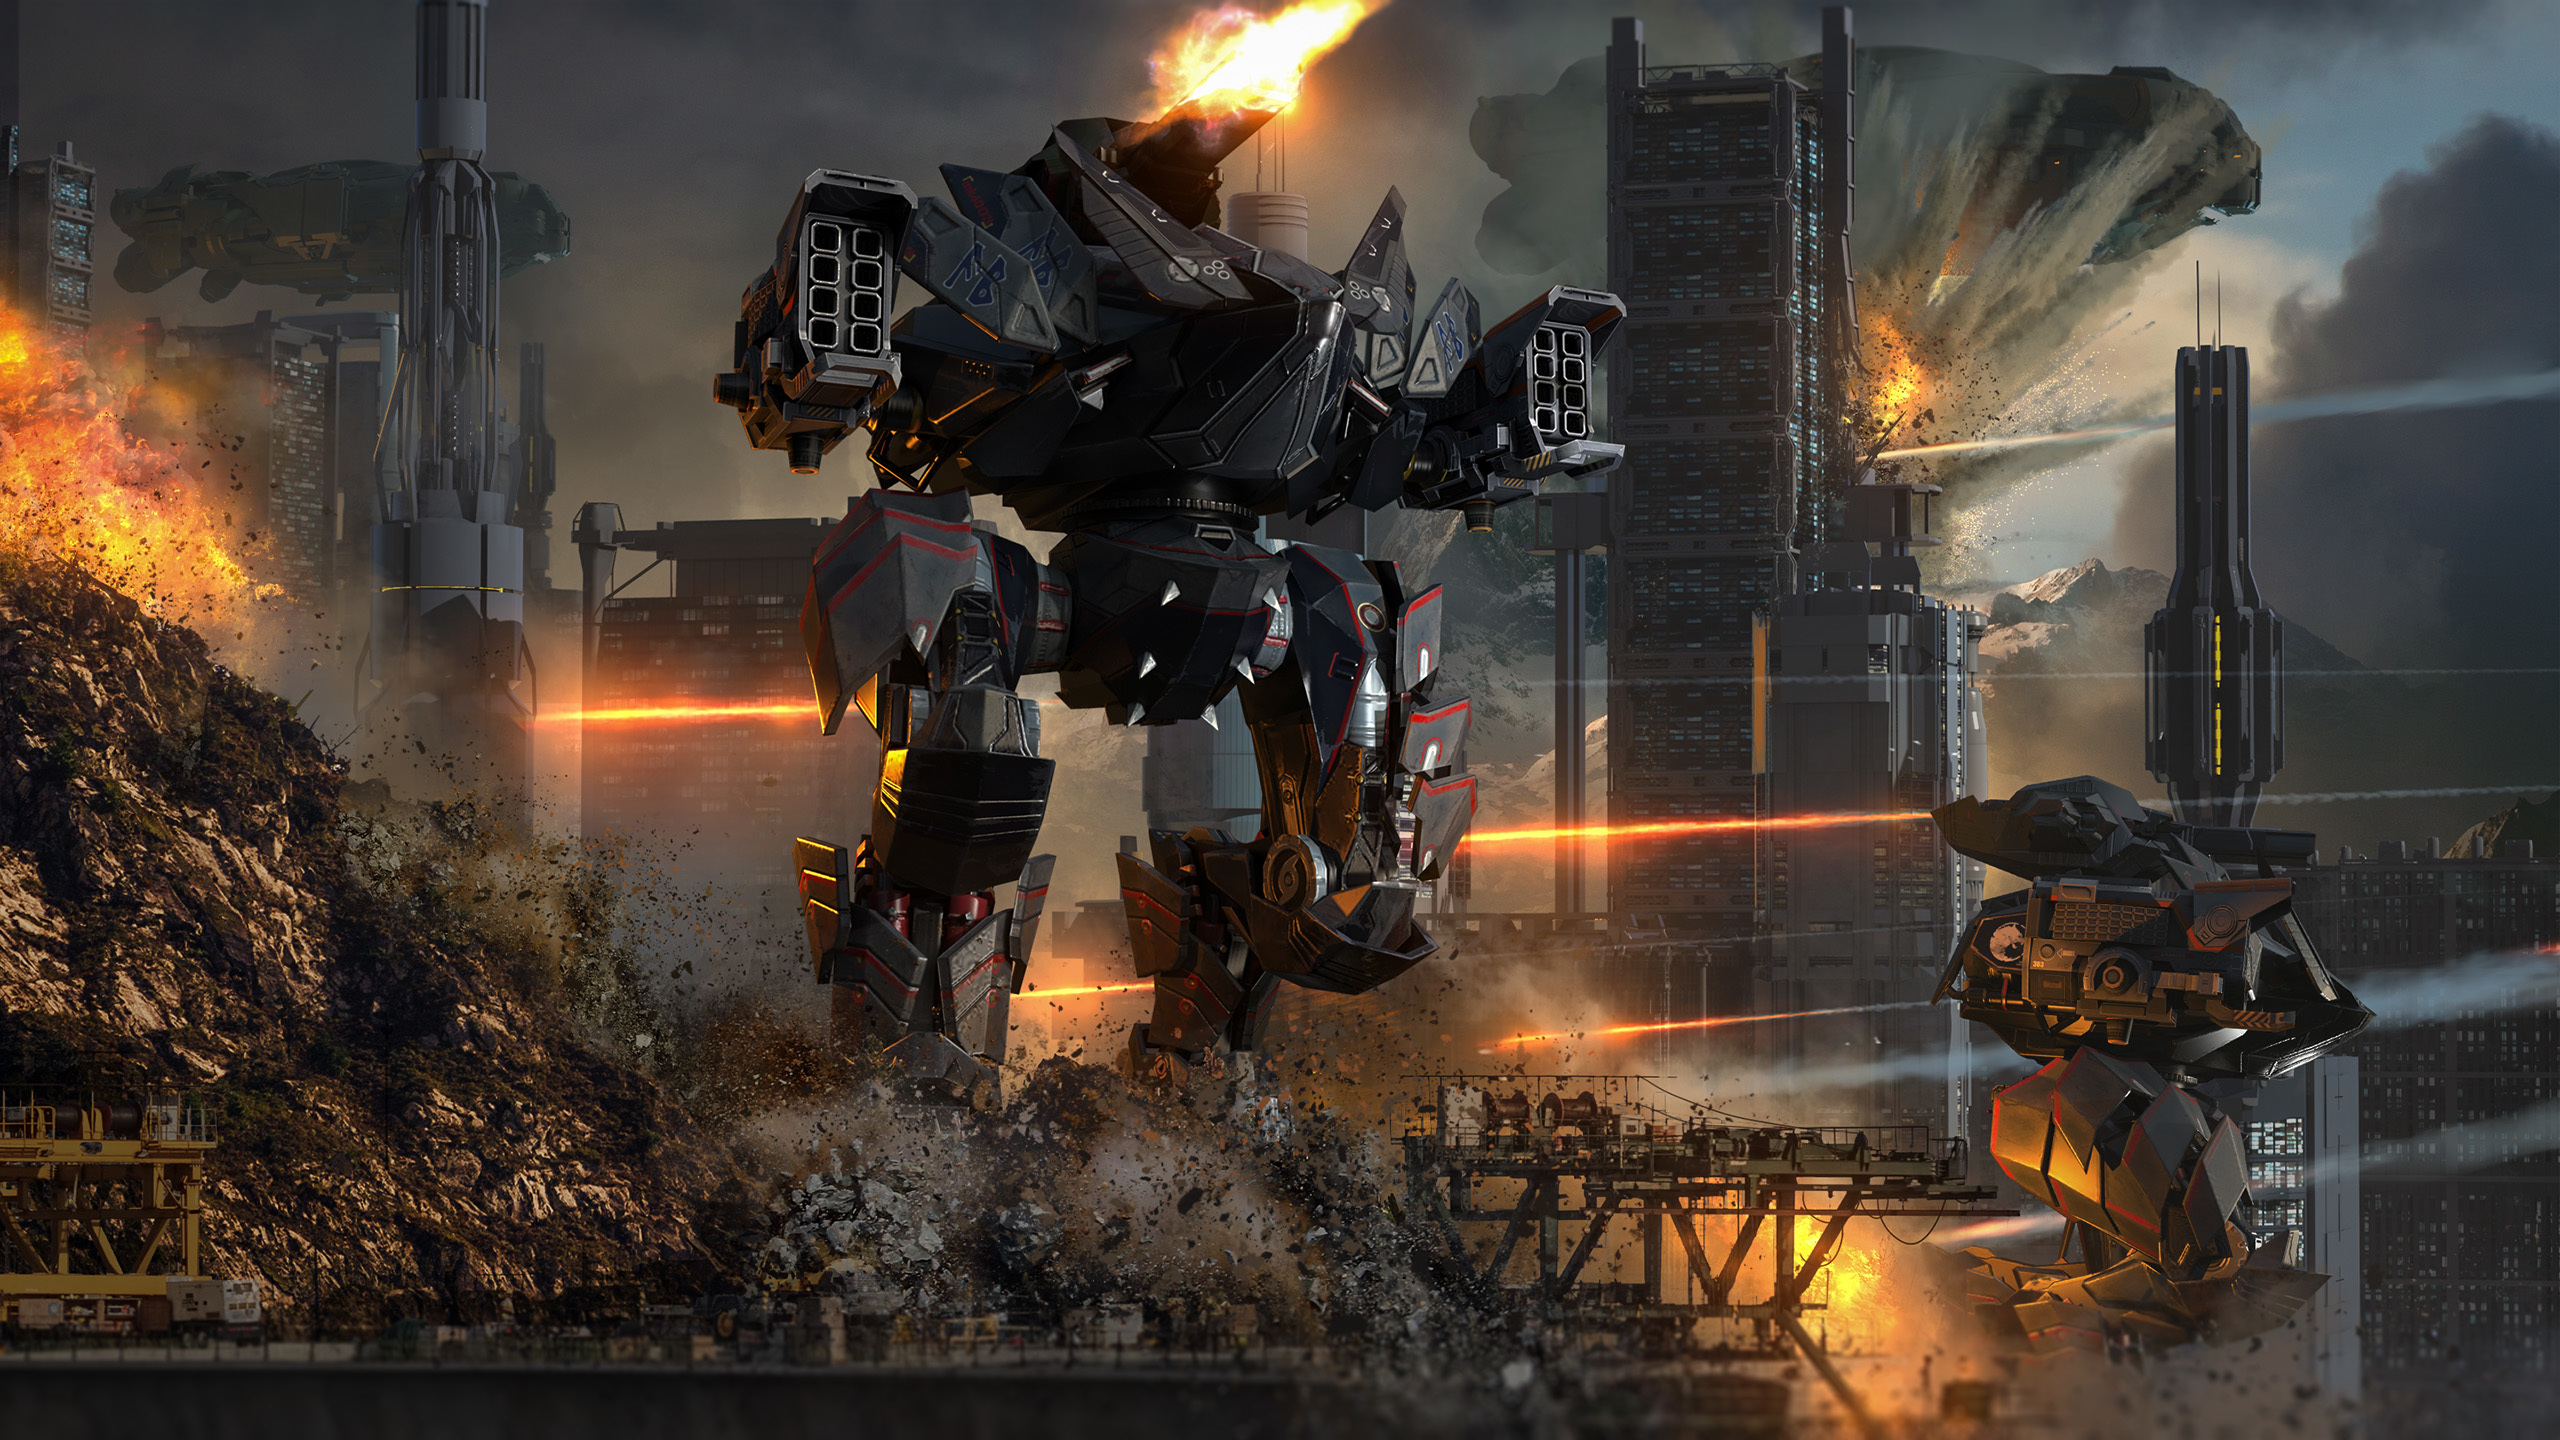 50+ War Robots HD Wallpapers and Backgrounds